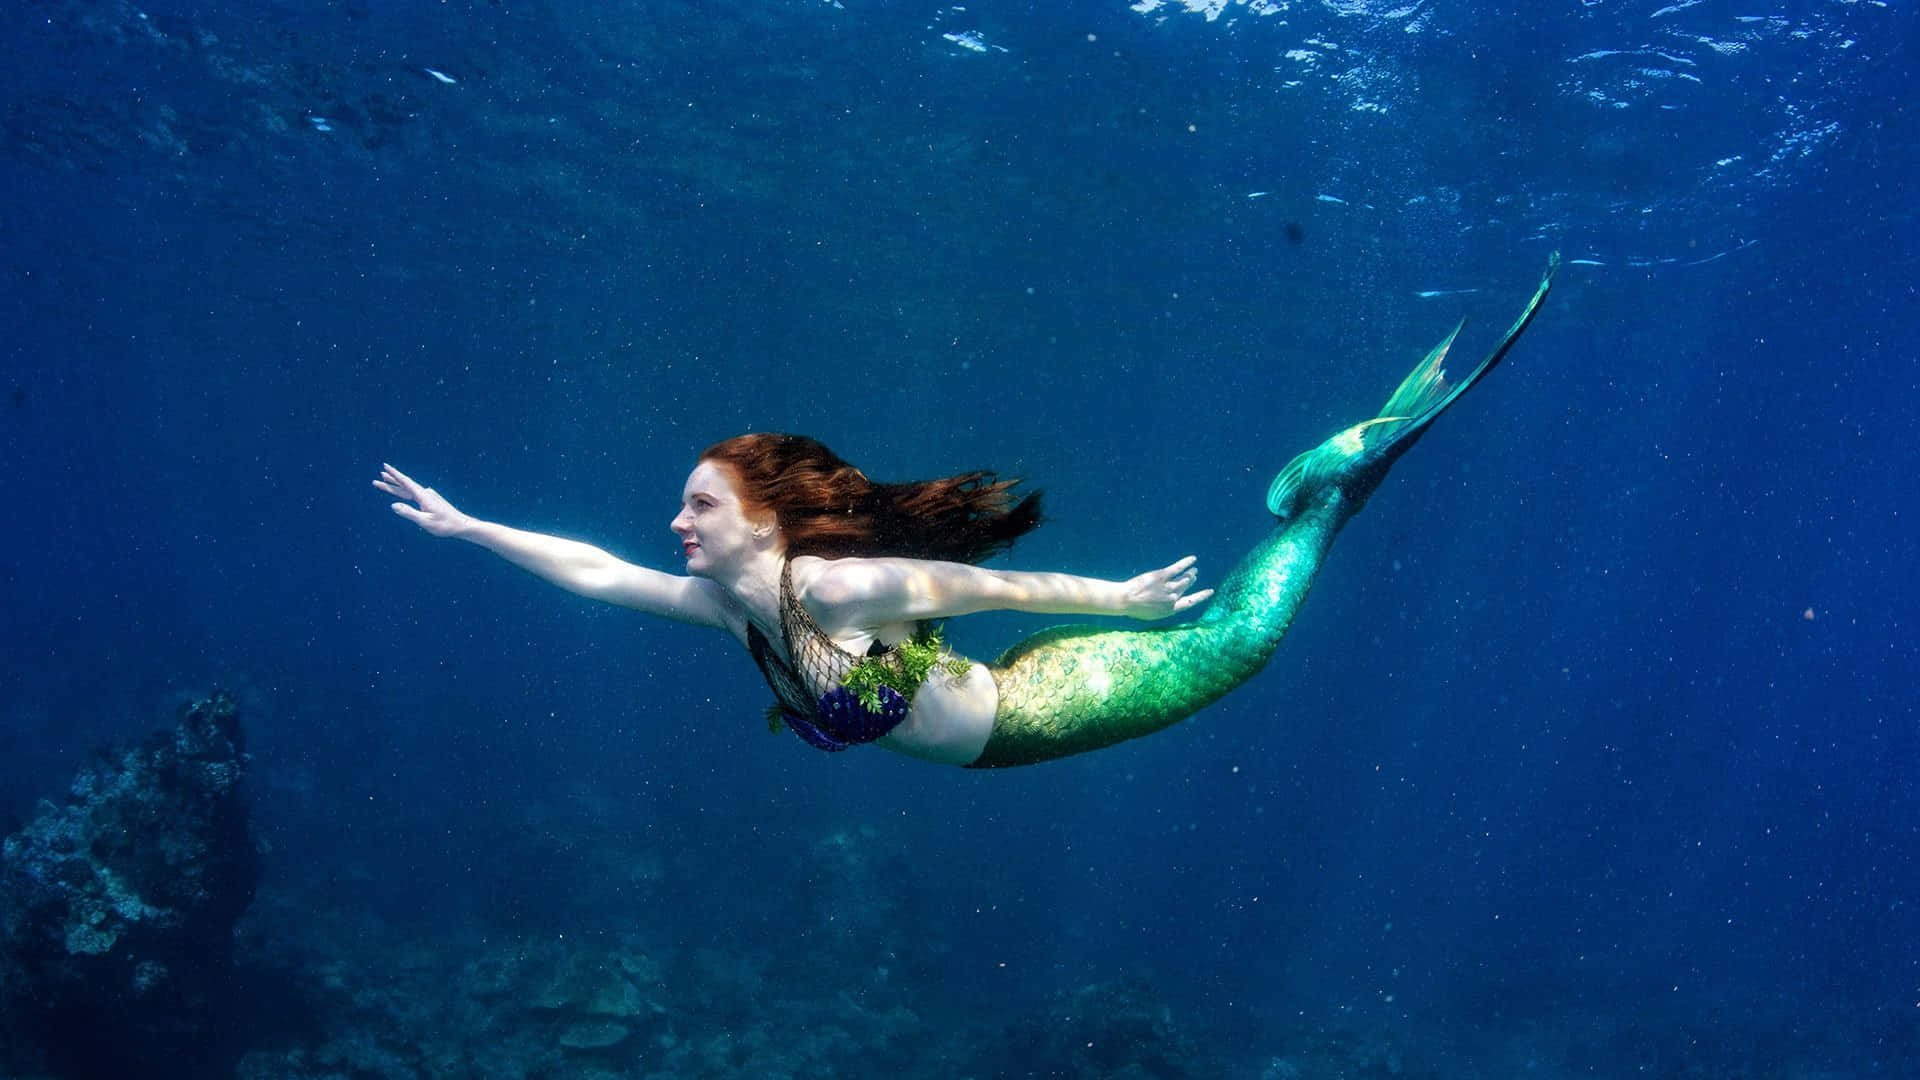 "The Real Life Mermaid in all its beauty"